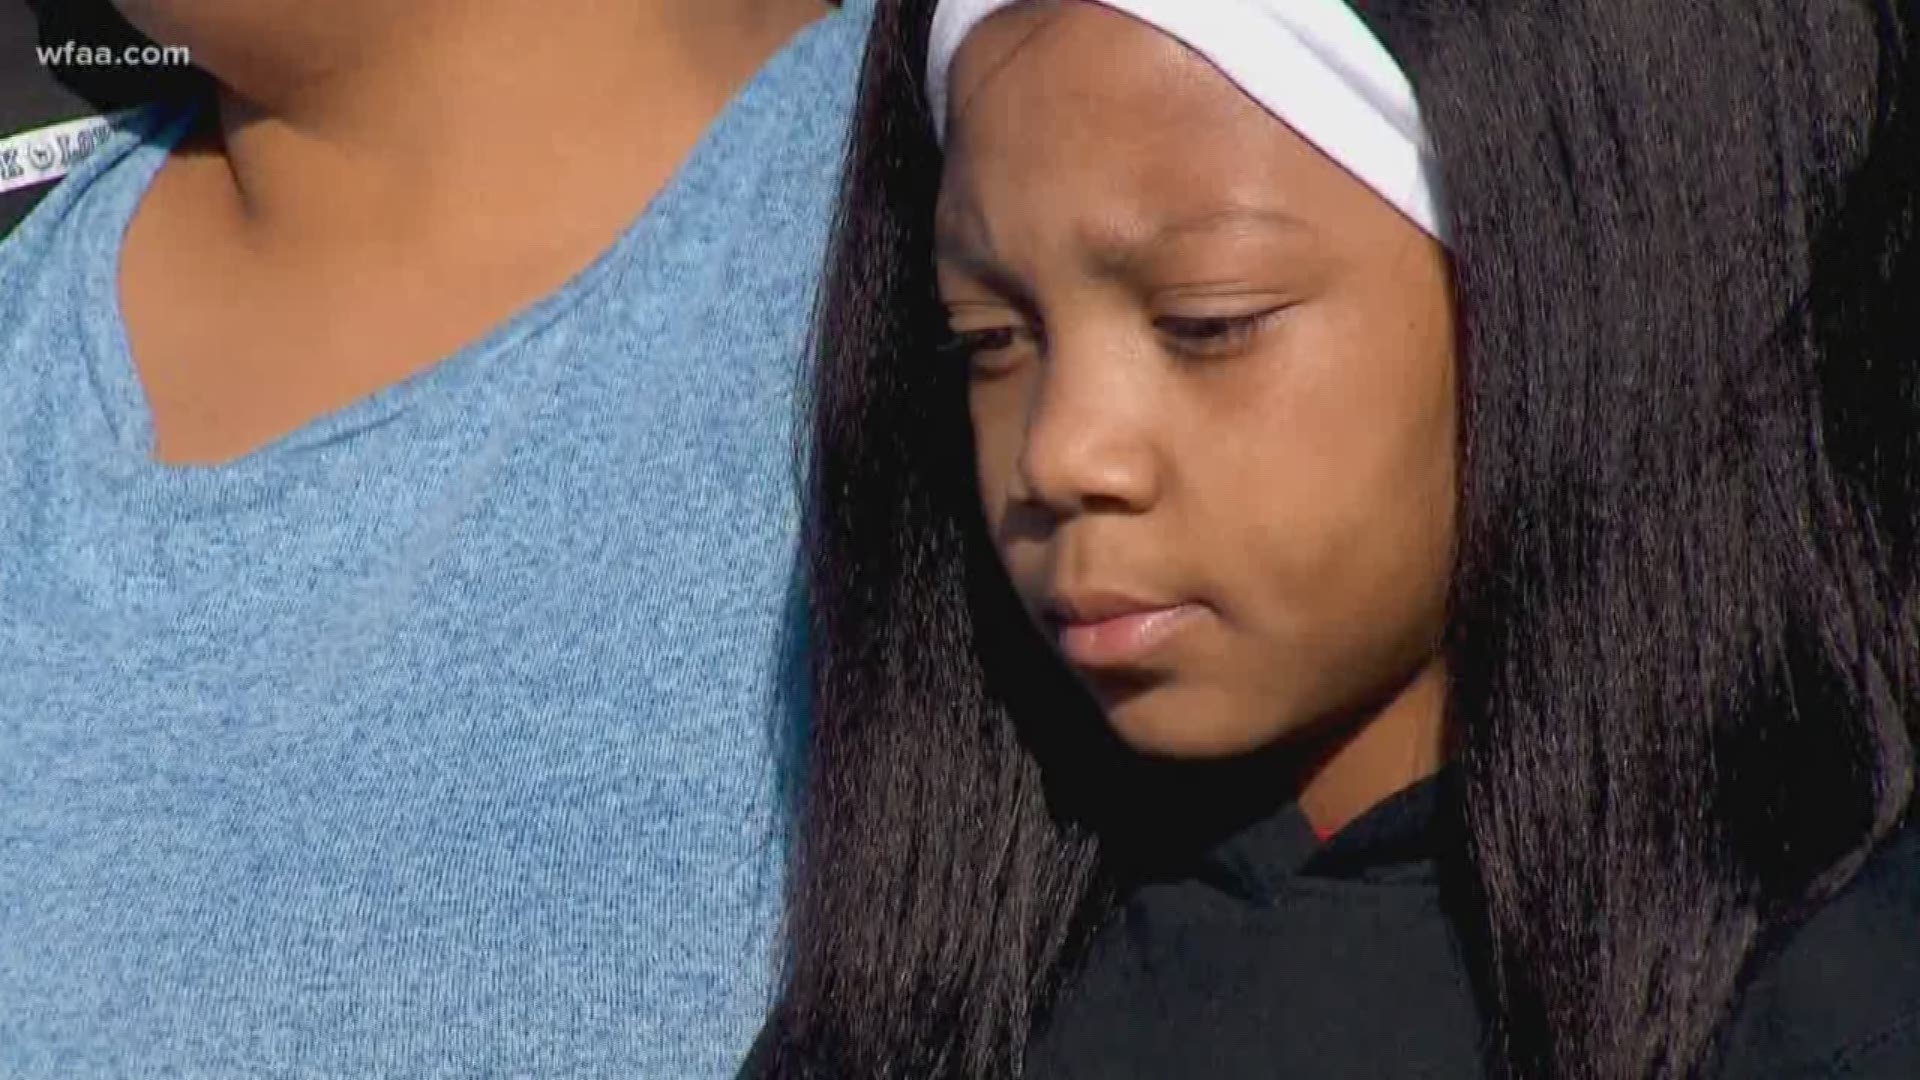 The sixth-grader says a student who had been picking on her, humiliated her in front of other students at Bowman Middle School.